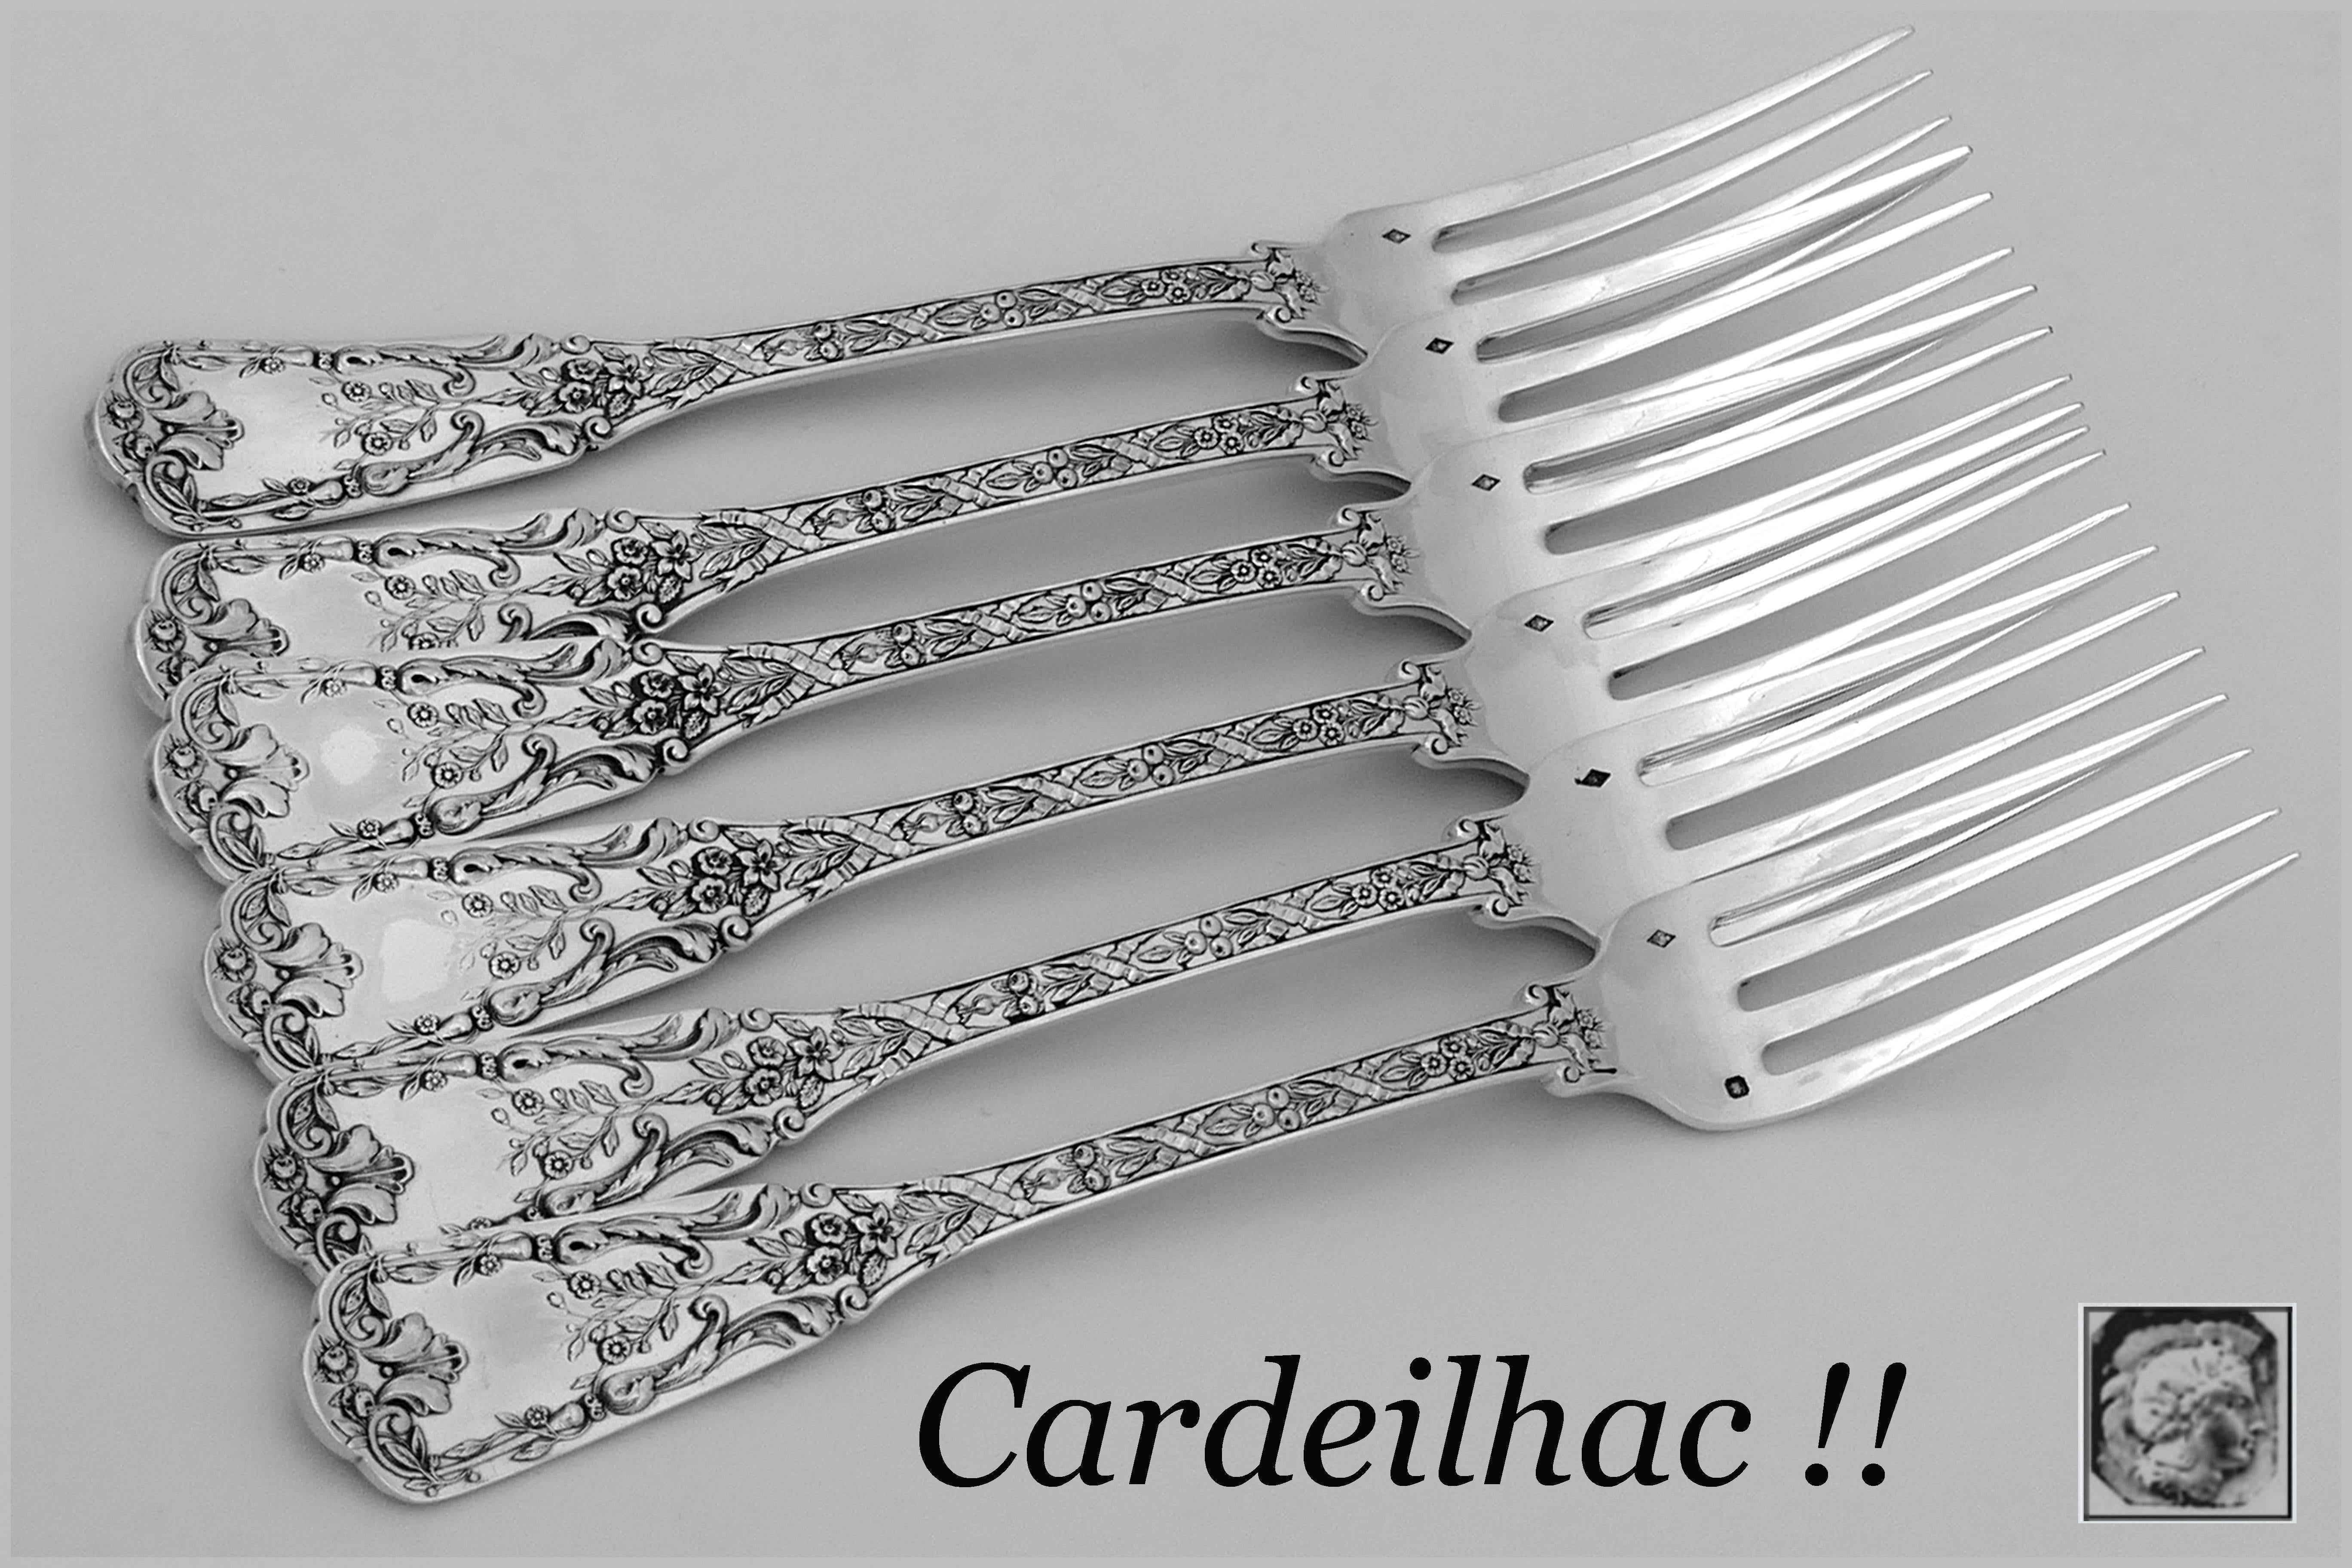 Fabulous French sterling silver dinner forks set six pieces. In the neoclassical pattern, with sumptuous decoration: Ribbons, garlands of flowers and foliage. 

Four sets available.

Of special note is the weight and heft of these pieces. 

To